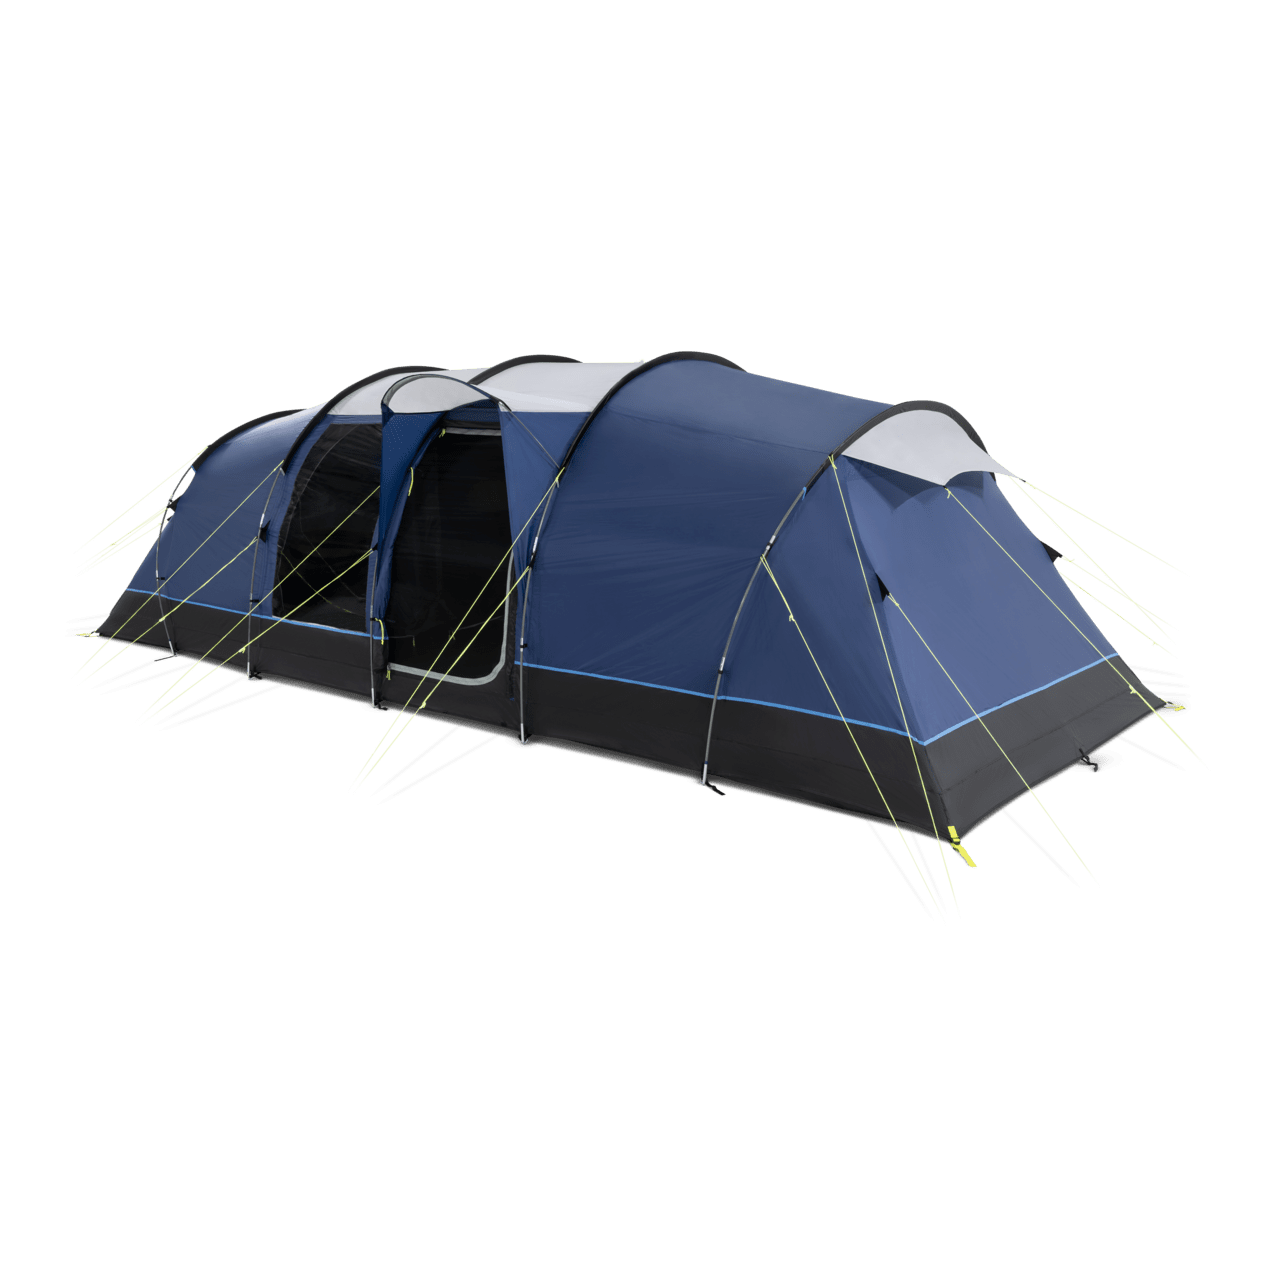 Kampa Watergate 8 - 8 person poled tent